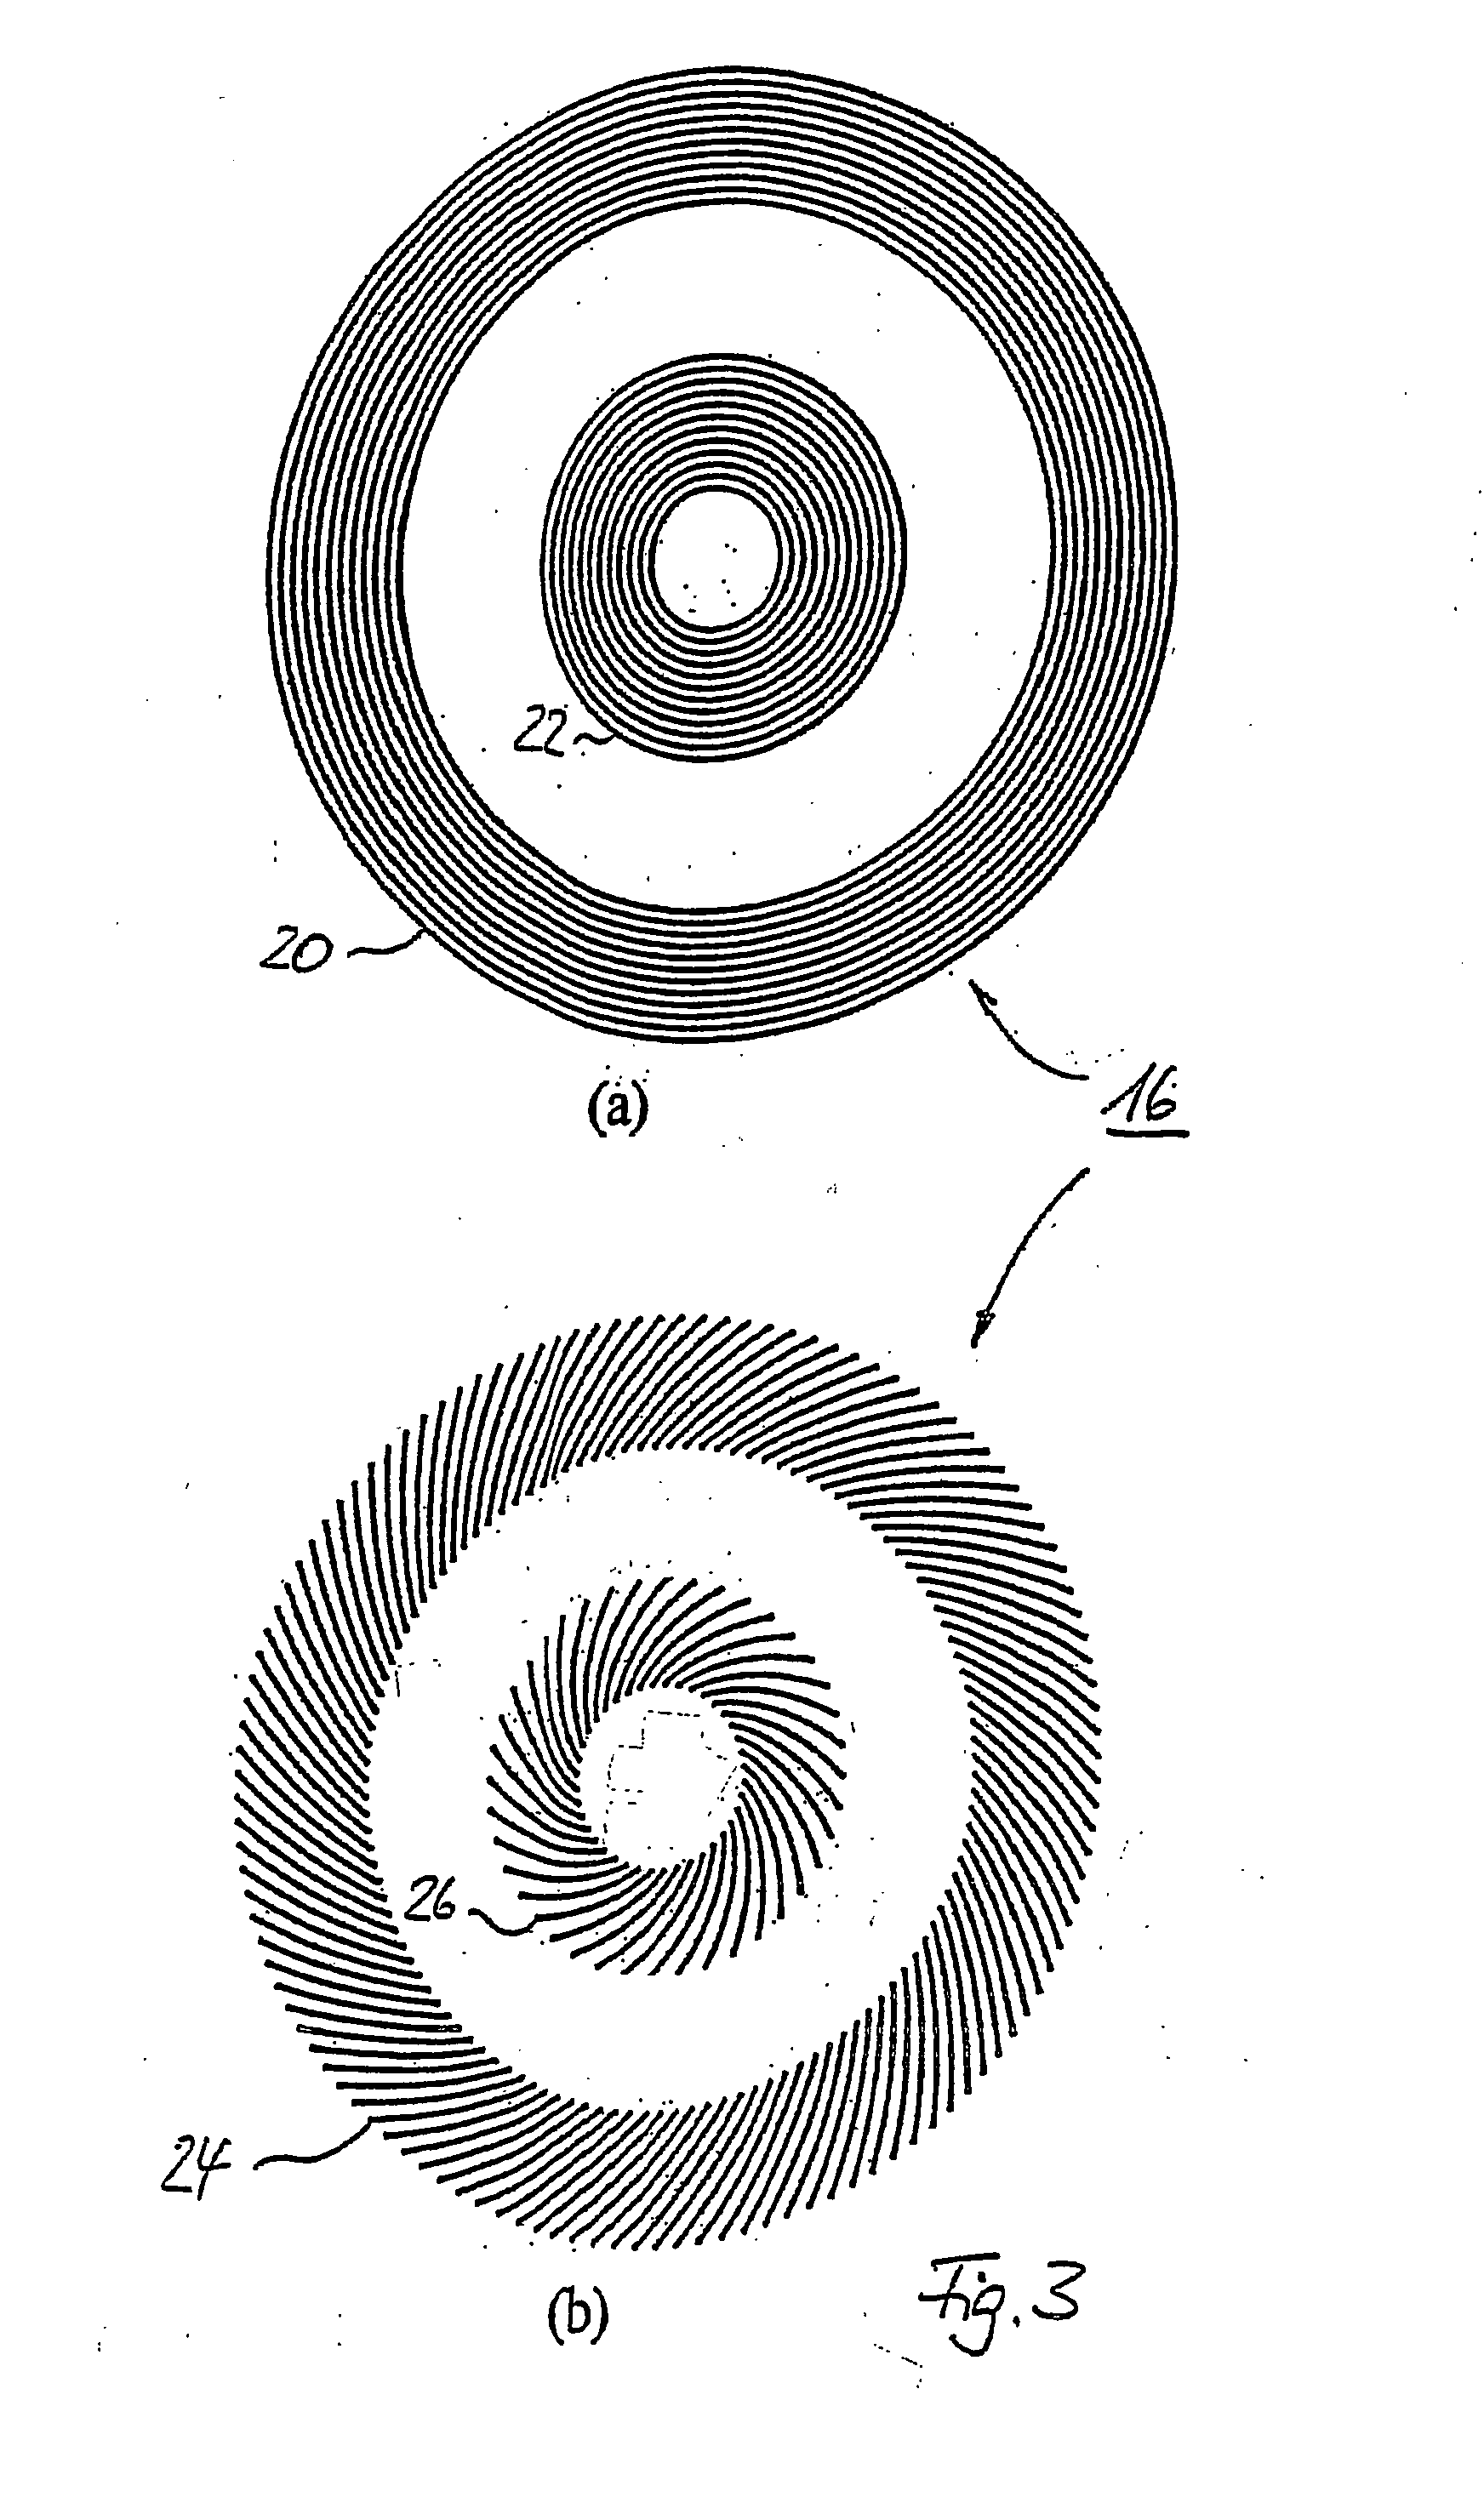 Method for generating a circular periodic structure on a basic support material